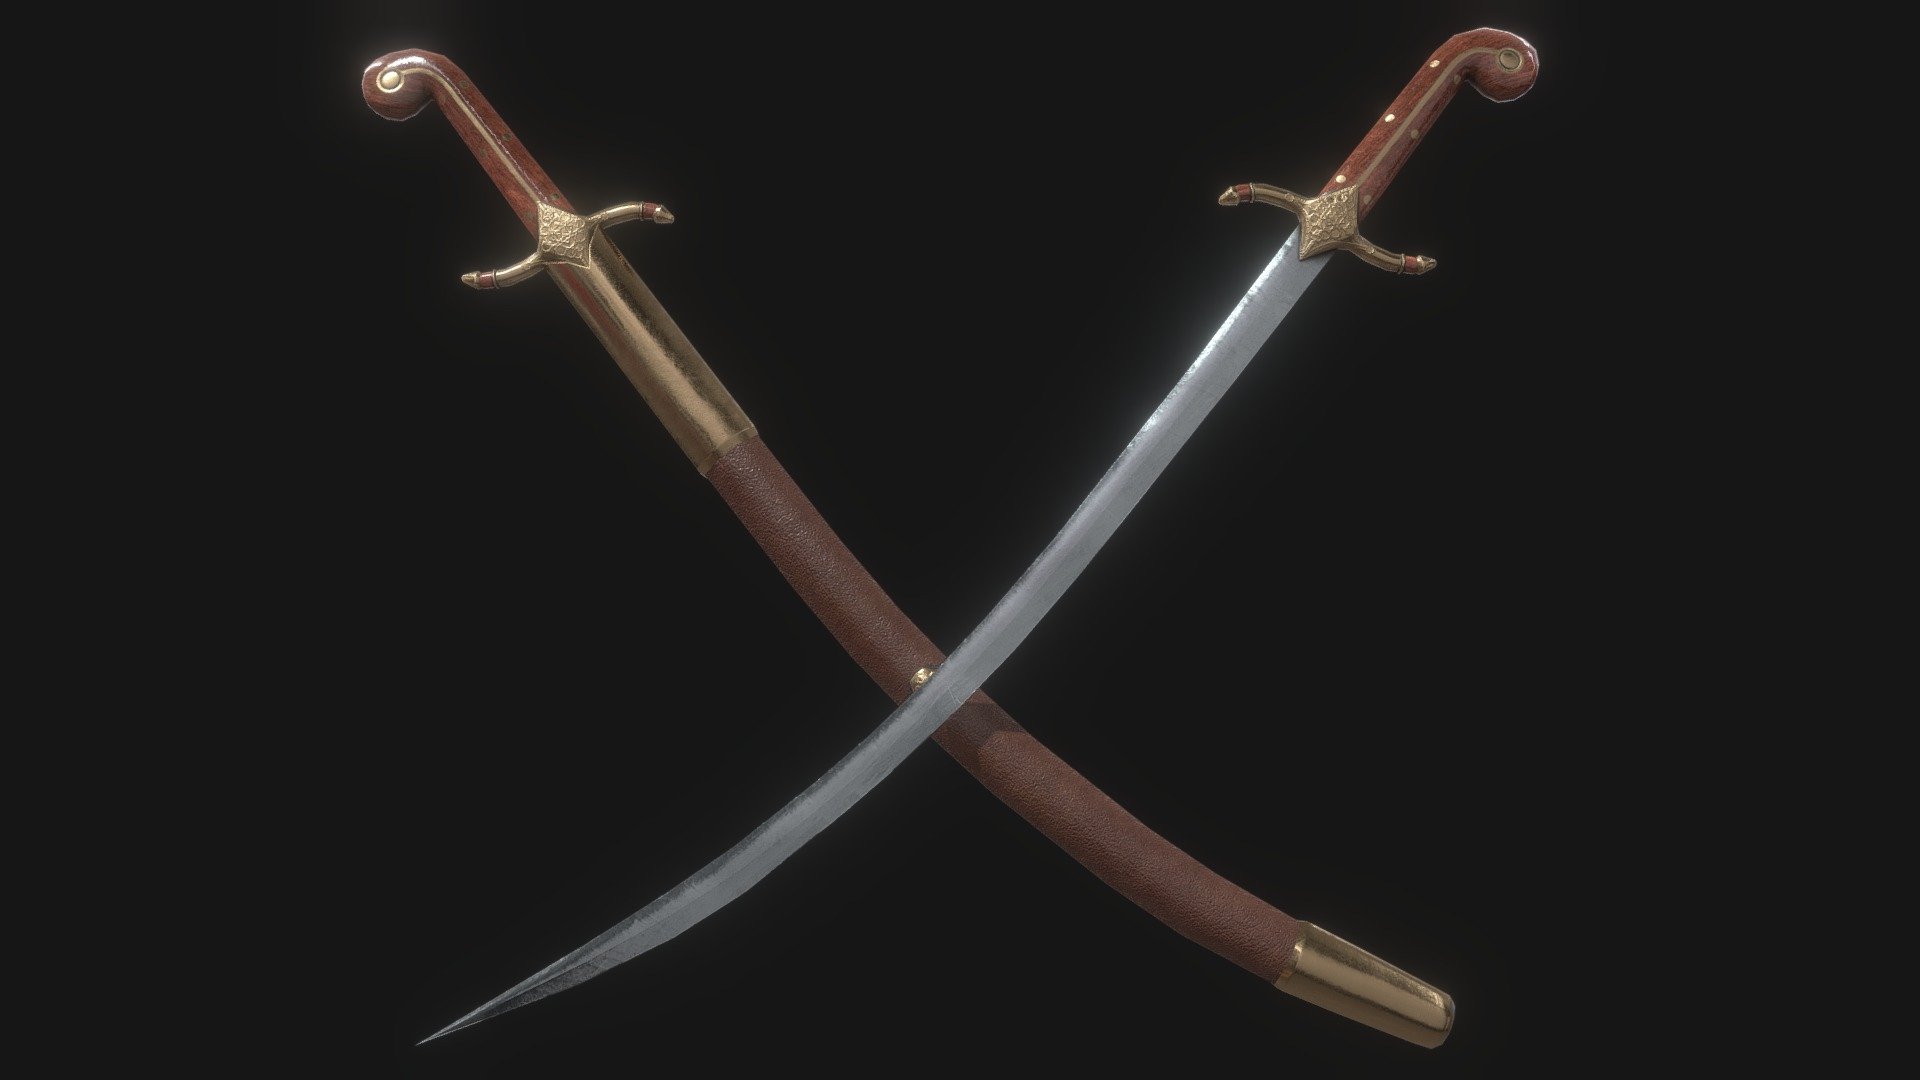 An eastern medieval Sabre and Sheathe!

Designed for games in Low-poly PBR including Albedo, Normal, Metallic, AO, and Roughness 2K textures.

This model from Ferocious Industries can be found in 3 different material skins, and this one uses the ‘Aged Bronze’ texture set.

1044 Triangles (One Sword + One Sheathe) 3d model